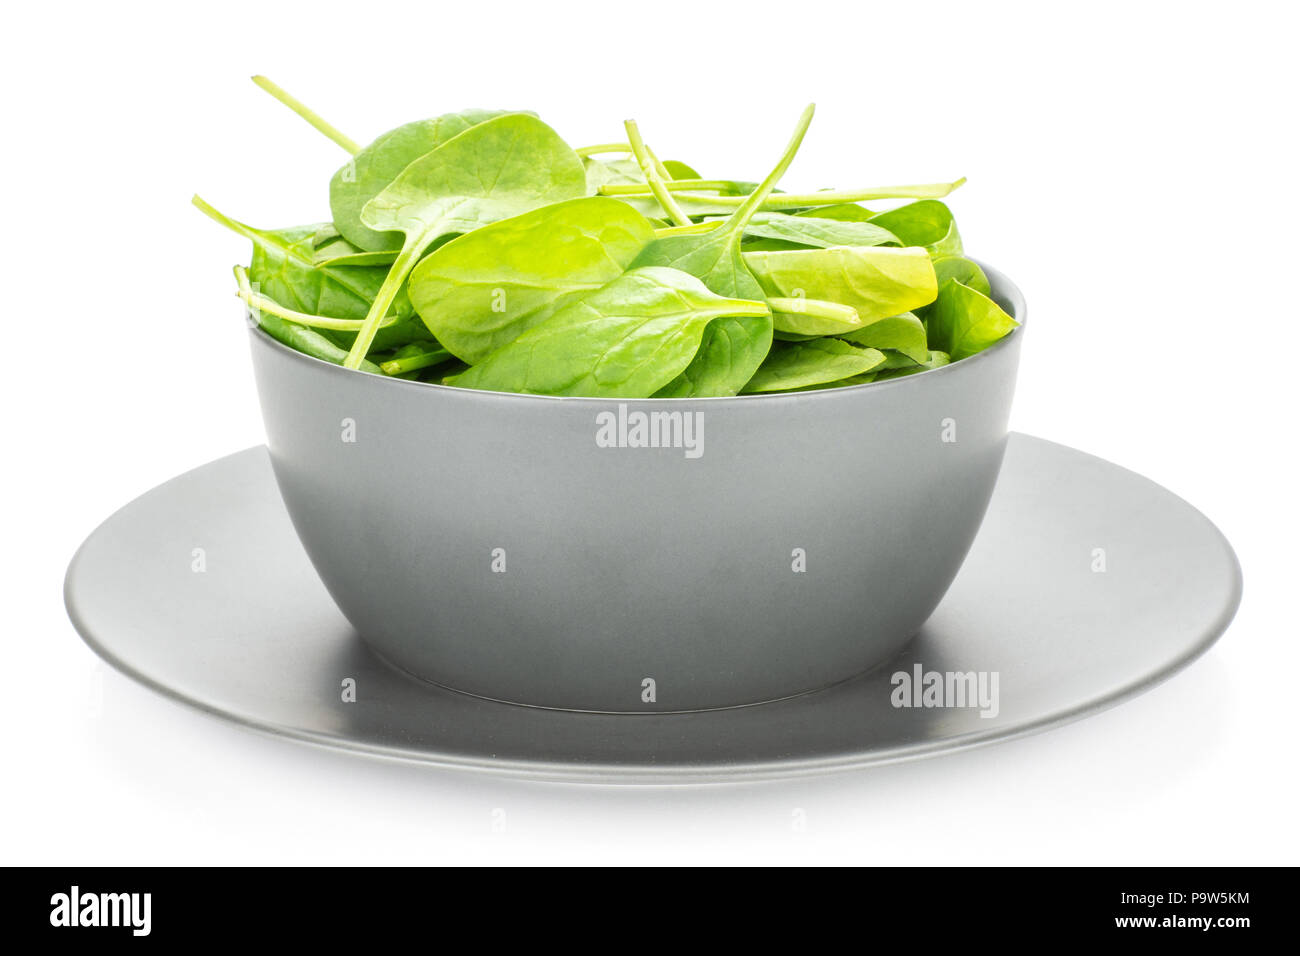 Fresh baby spinach leaves in a grey ceramic bowl isolated on white background Stock Photo